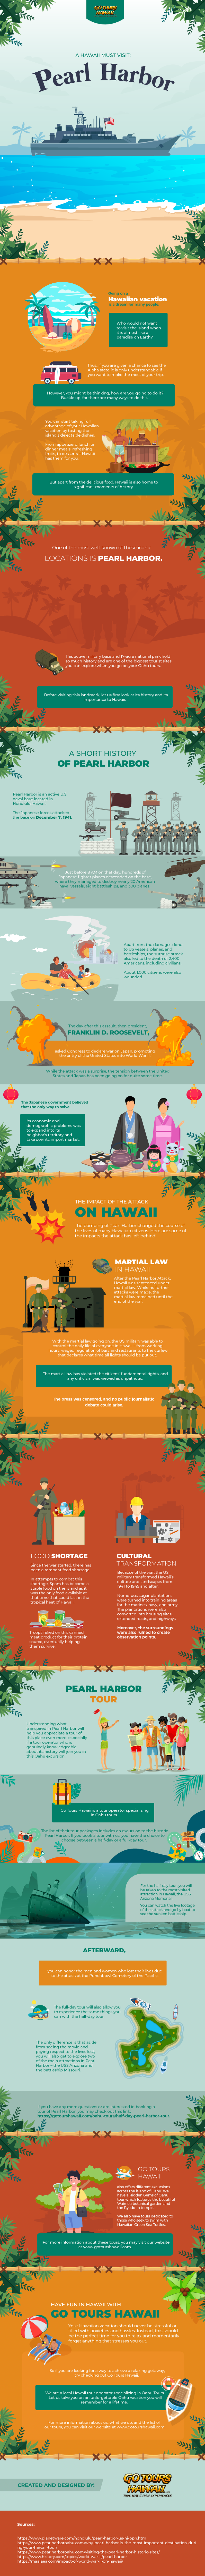 Hawaii-Tourist-Spot-Welcome-to-Pearl-Harbor-infographic-image-GDAK6523